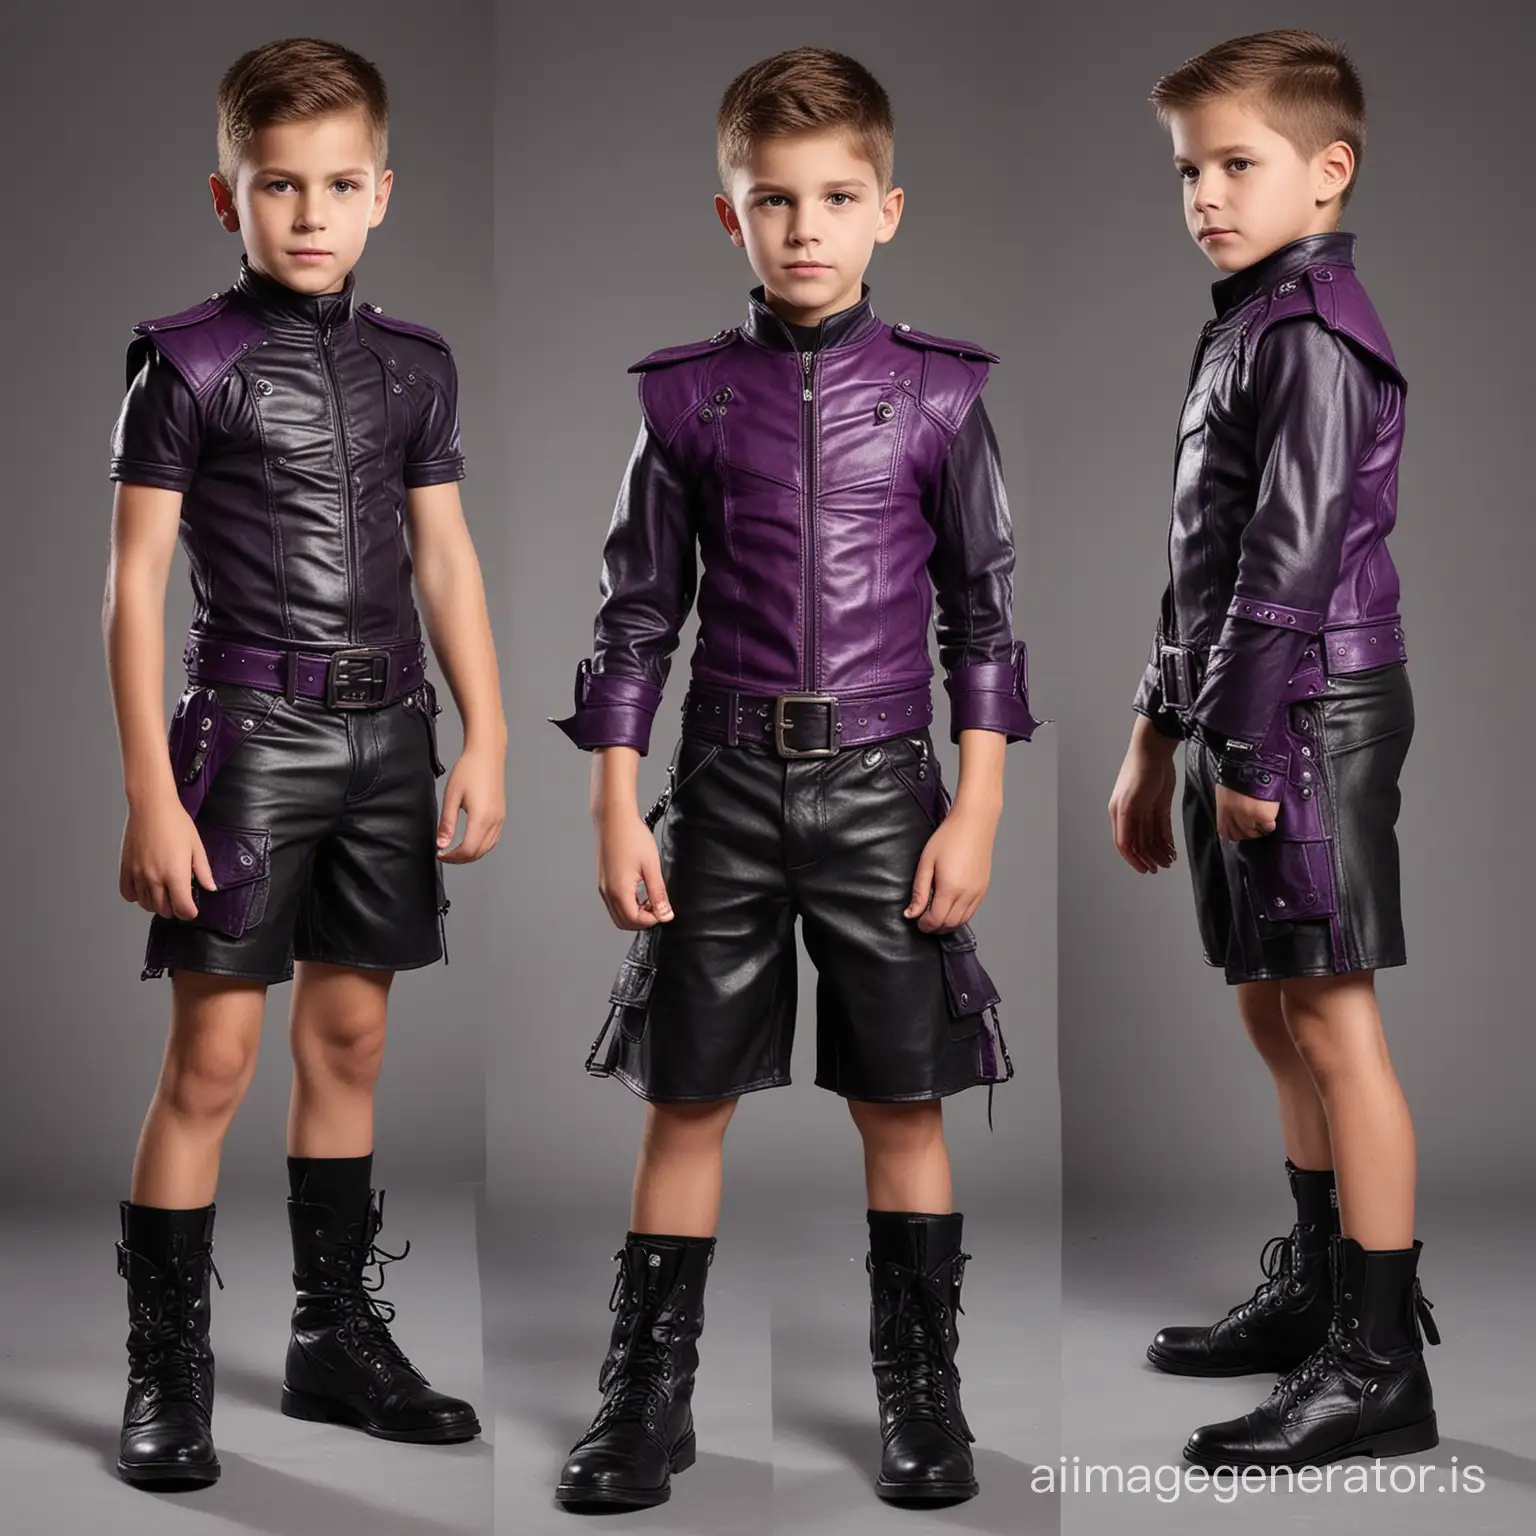 8YearOld-Boy-Villain-in-Intimidating-Leather-Outfit-with-Purple-and-Red-Highlights